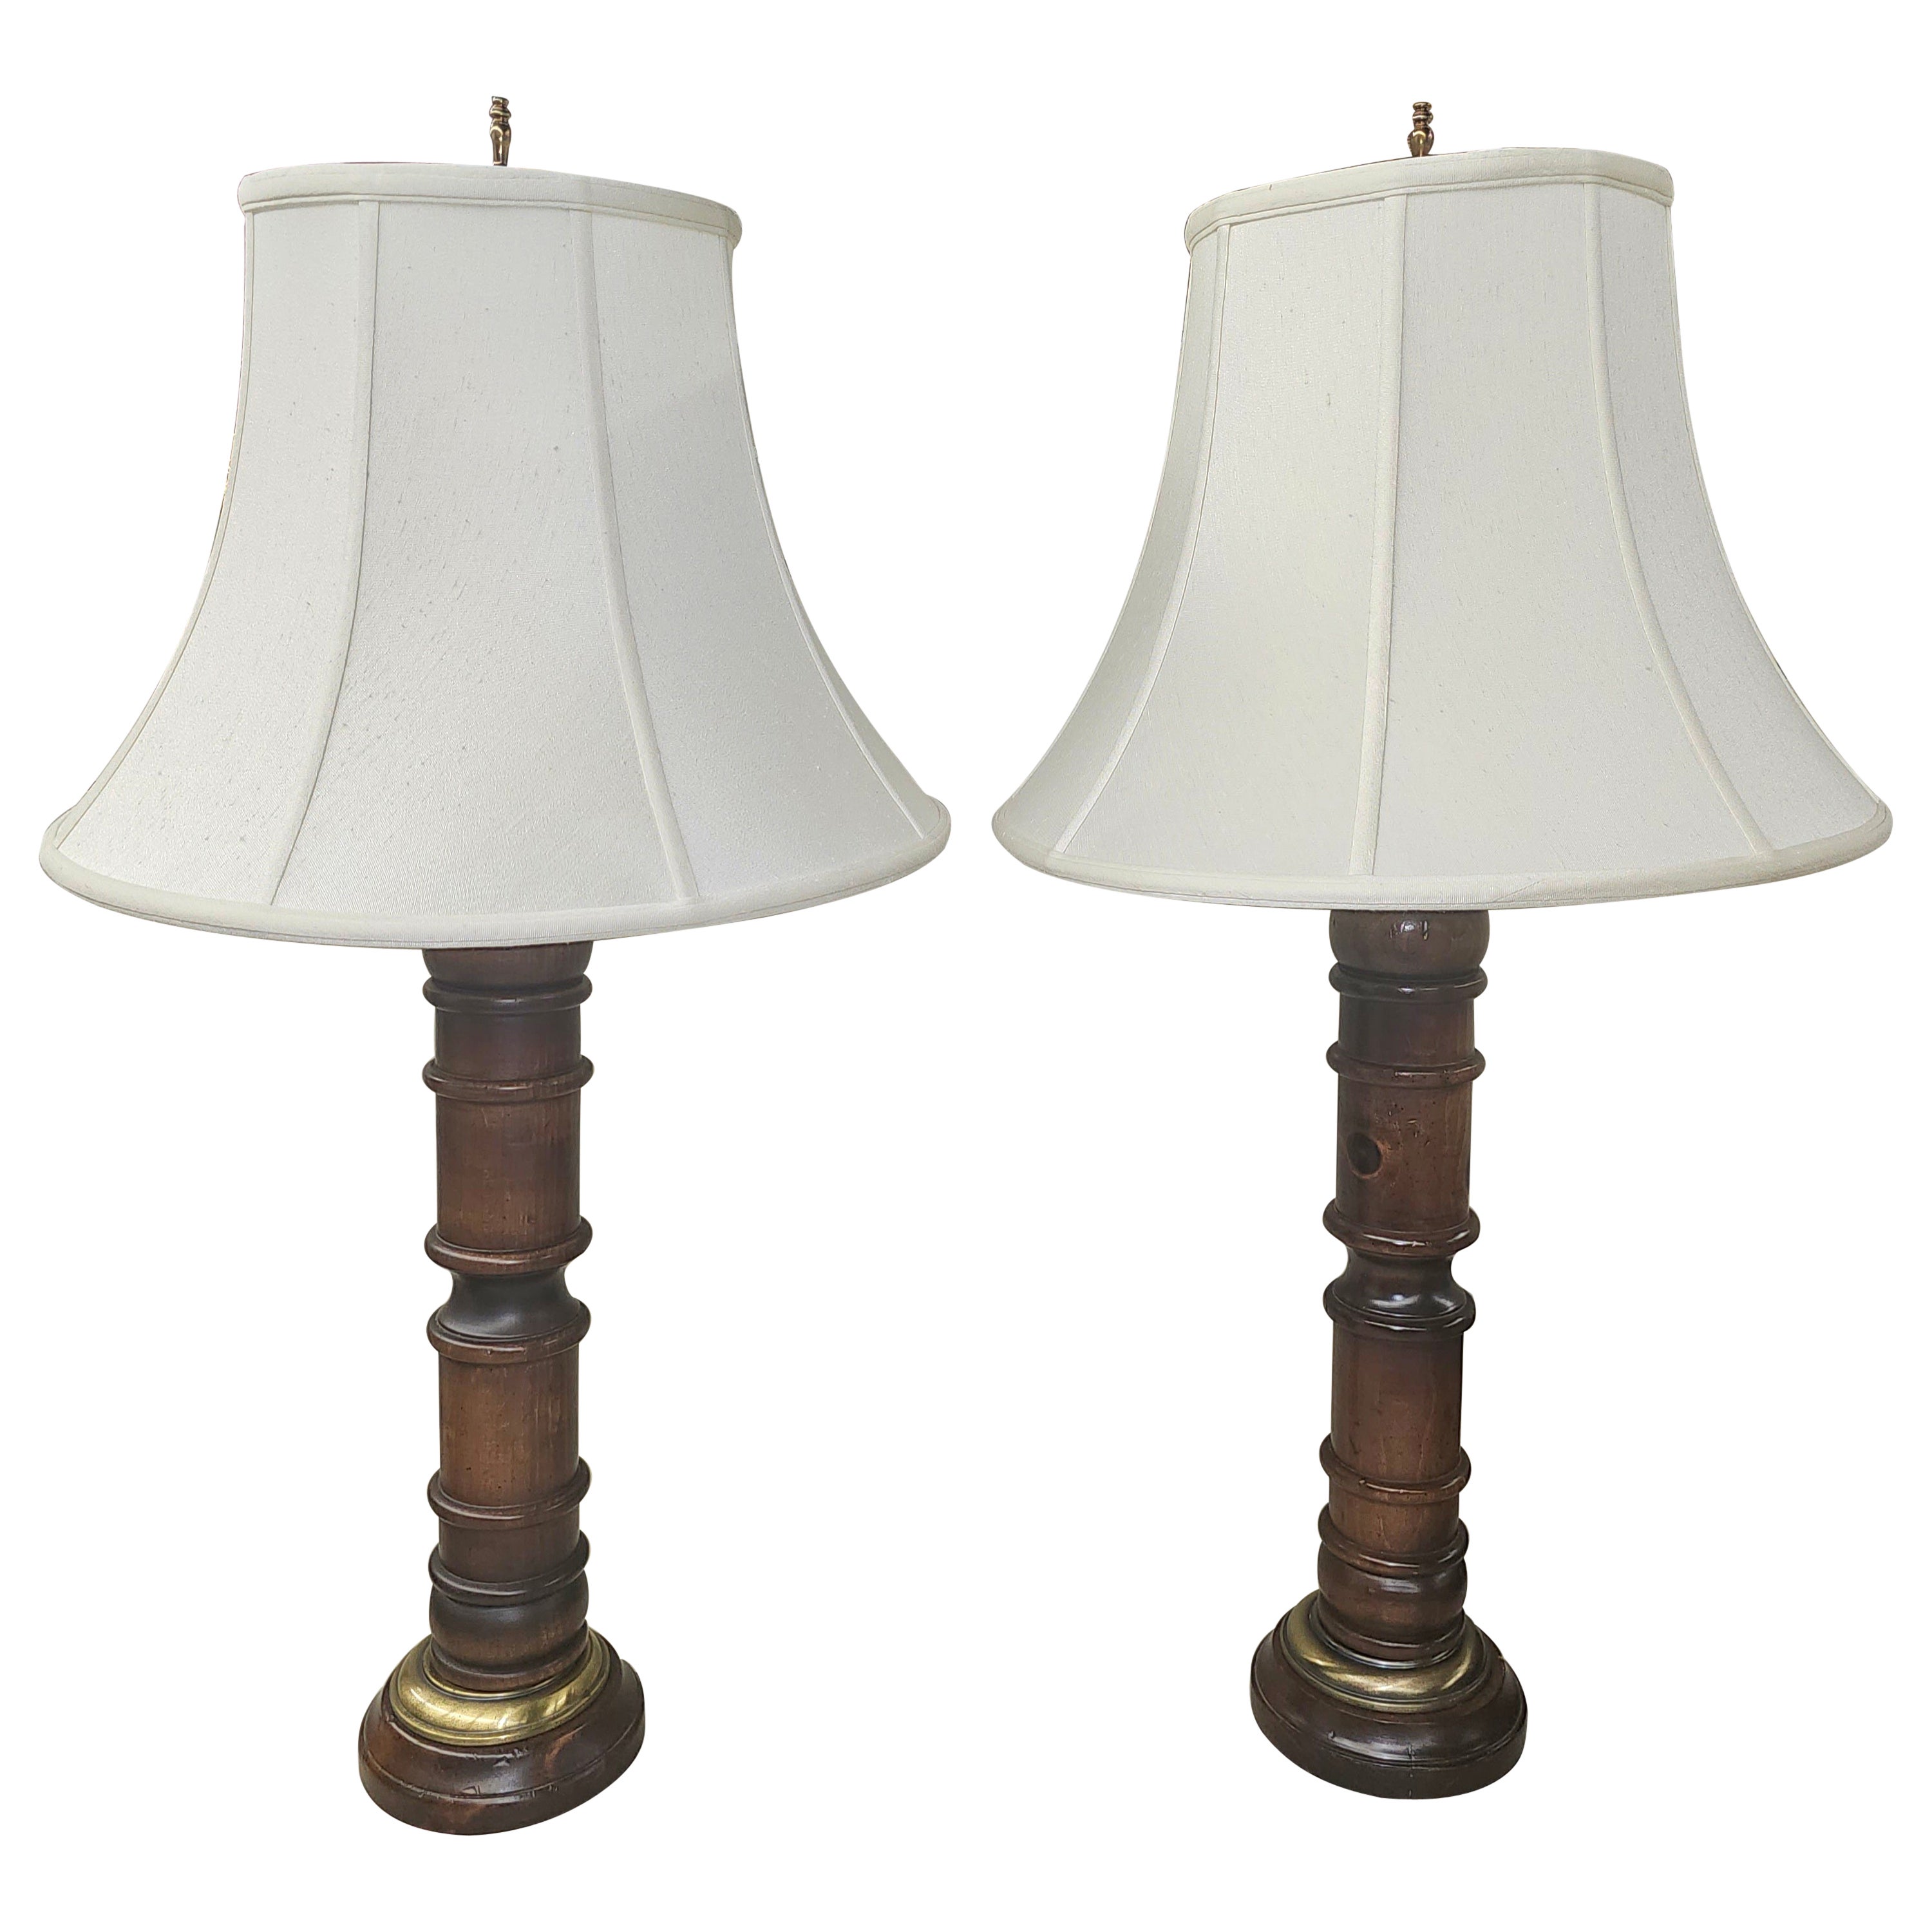 Pair Of Antiqued Pine Wood and Brass Column-Form Table Lamps For Sale